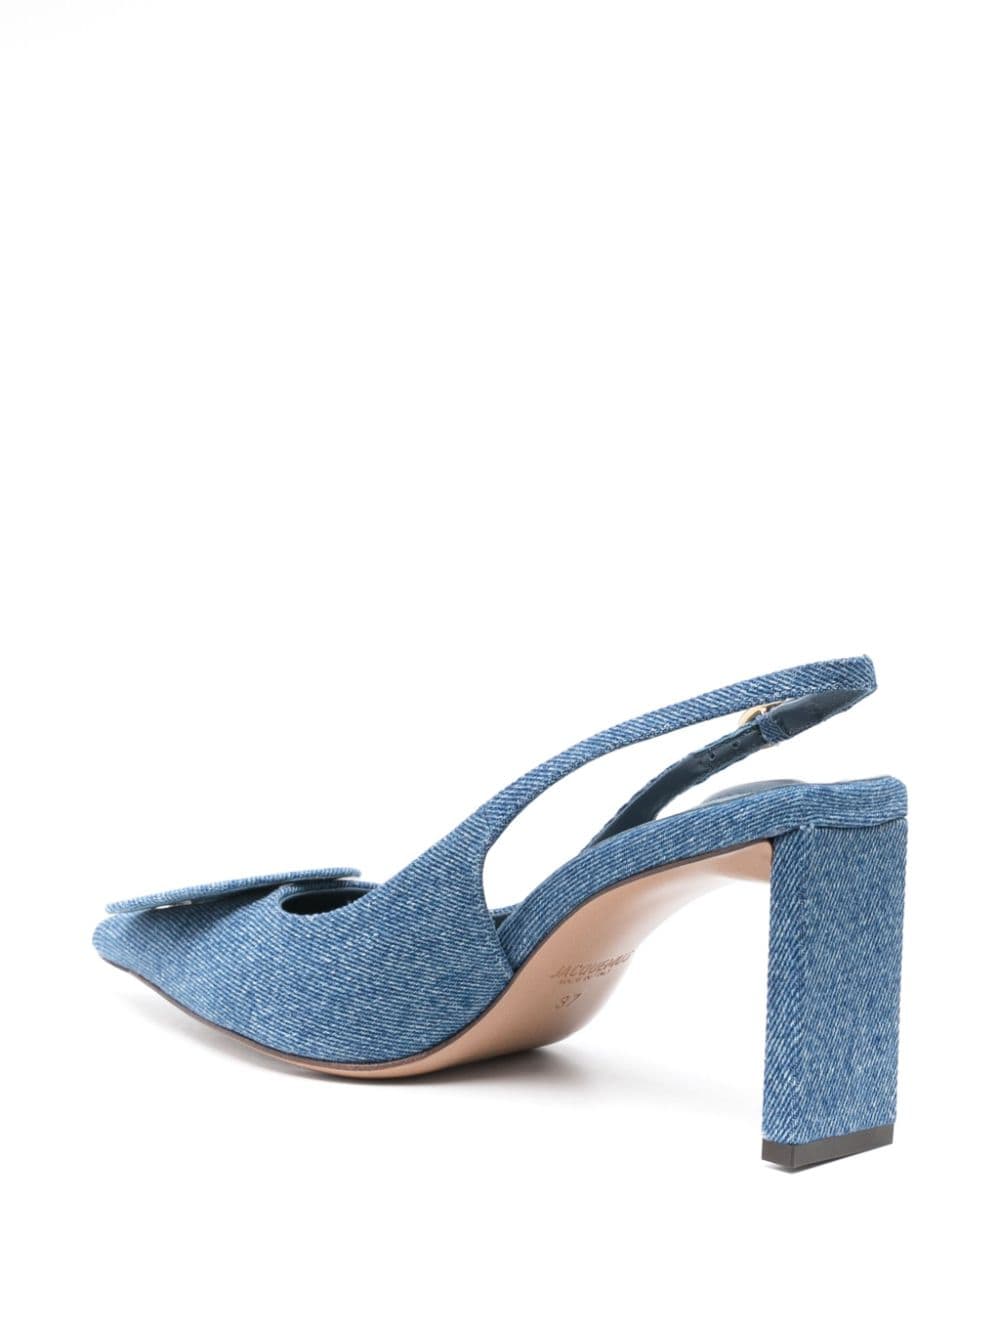 Jacquemus With Heel Blue